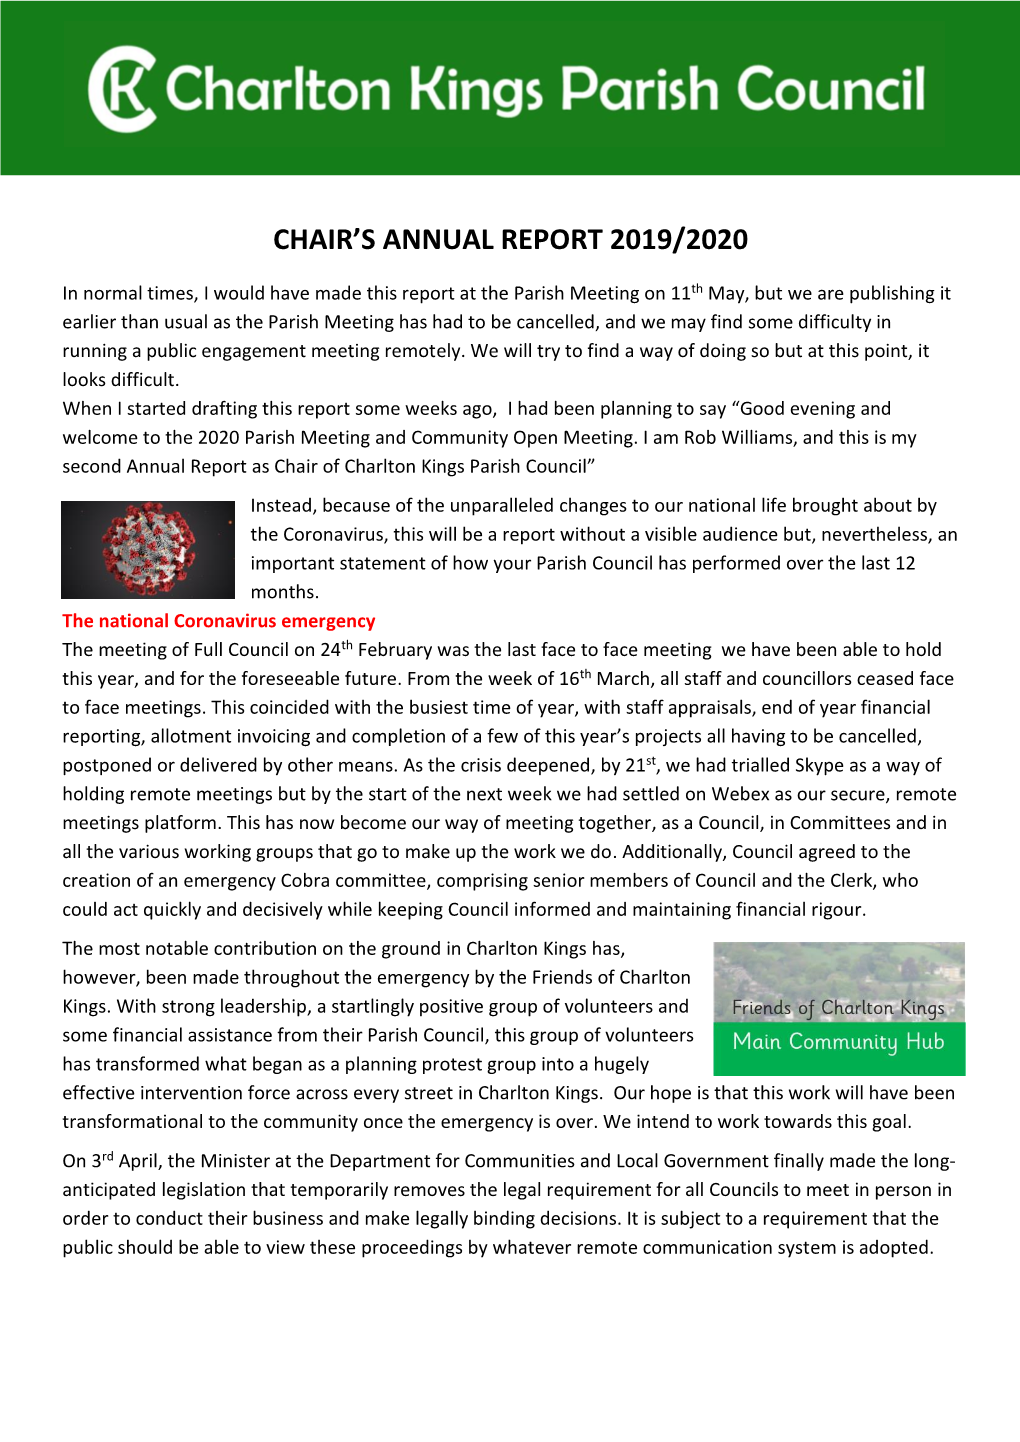 Chair's Annual Report 2019/2020